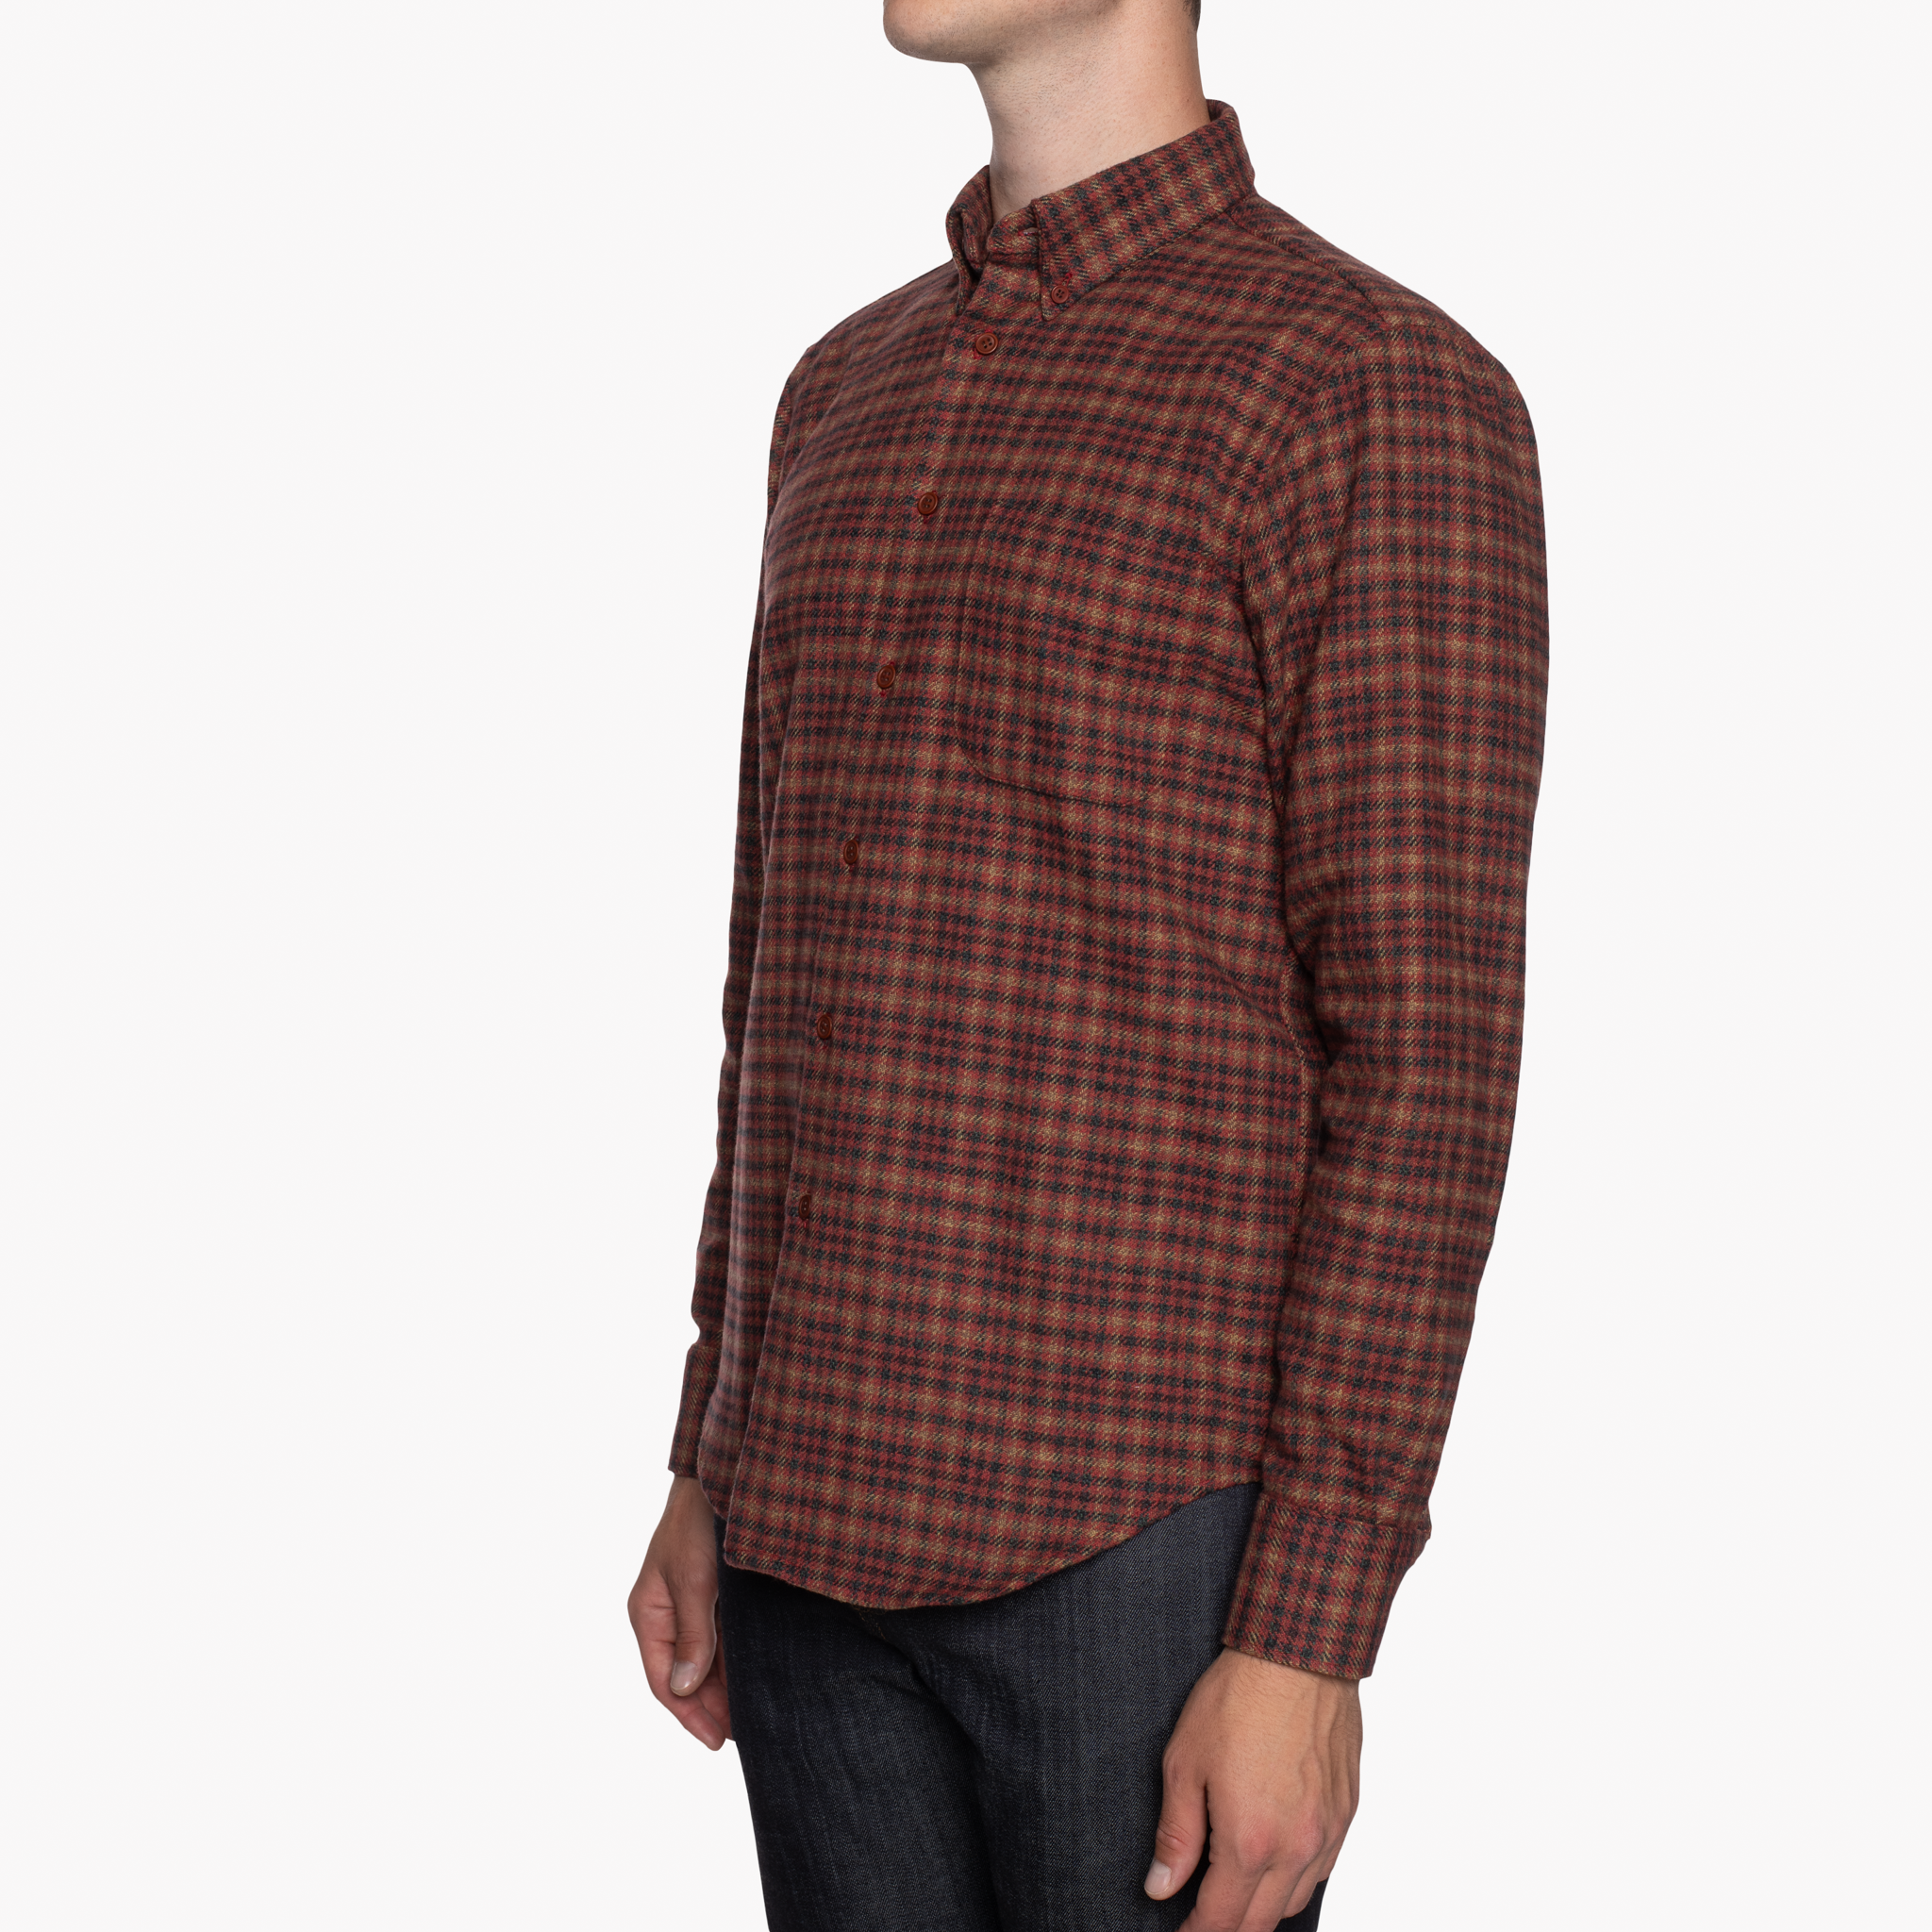  Easy Shirt - Heavy Vintage Flannel - Red - side 